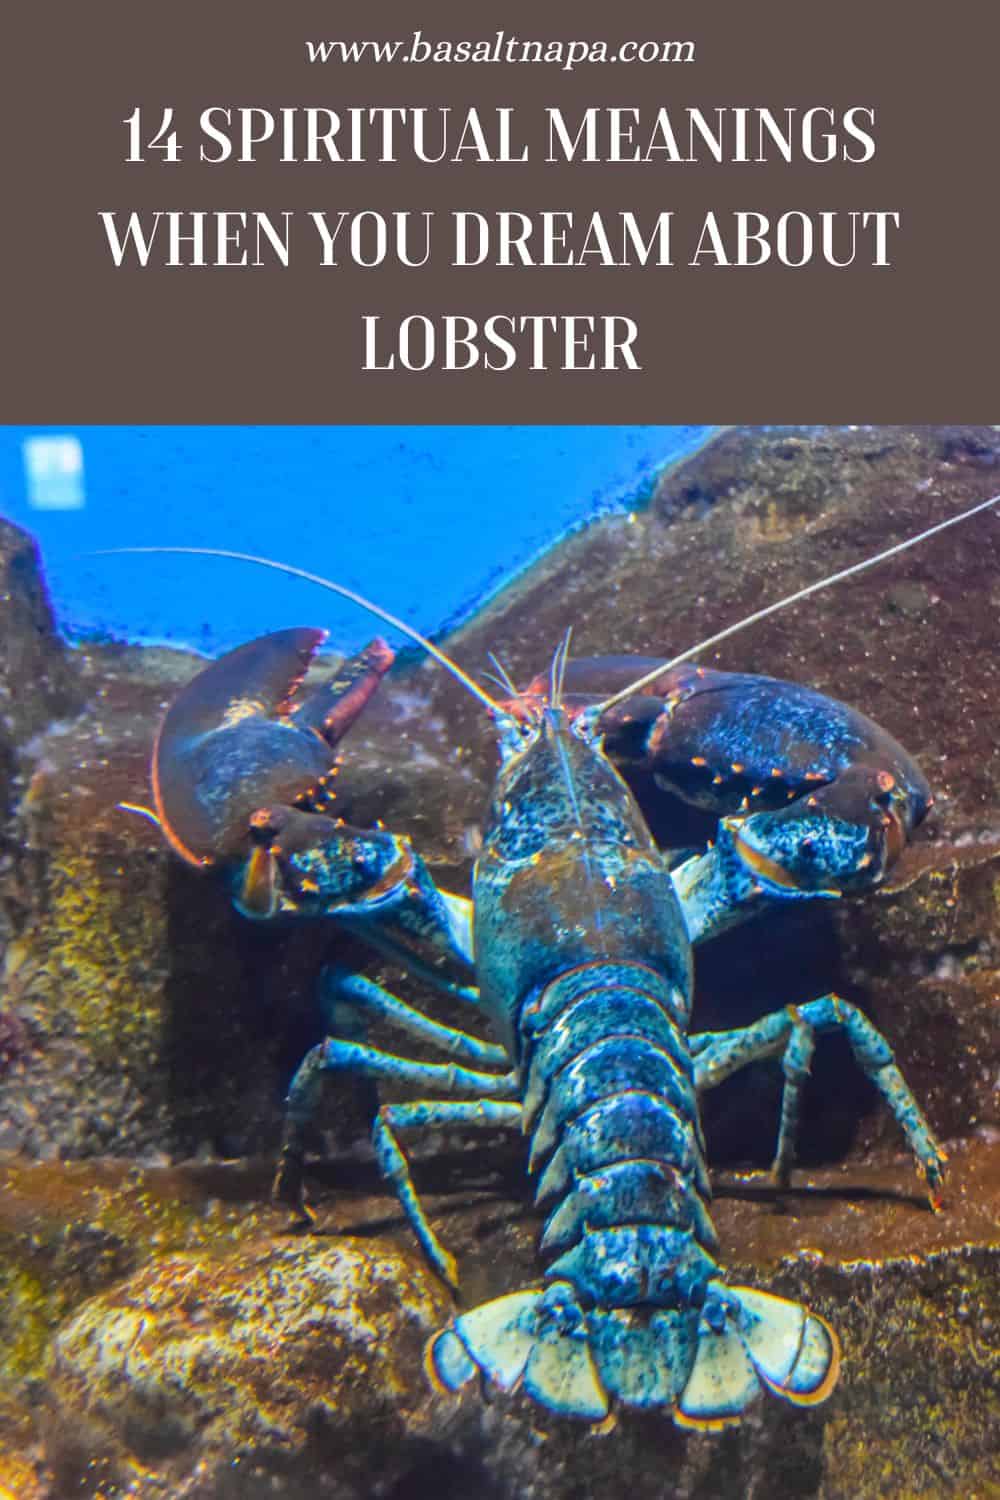 What Does It Mean To Dream About Lobsters